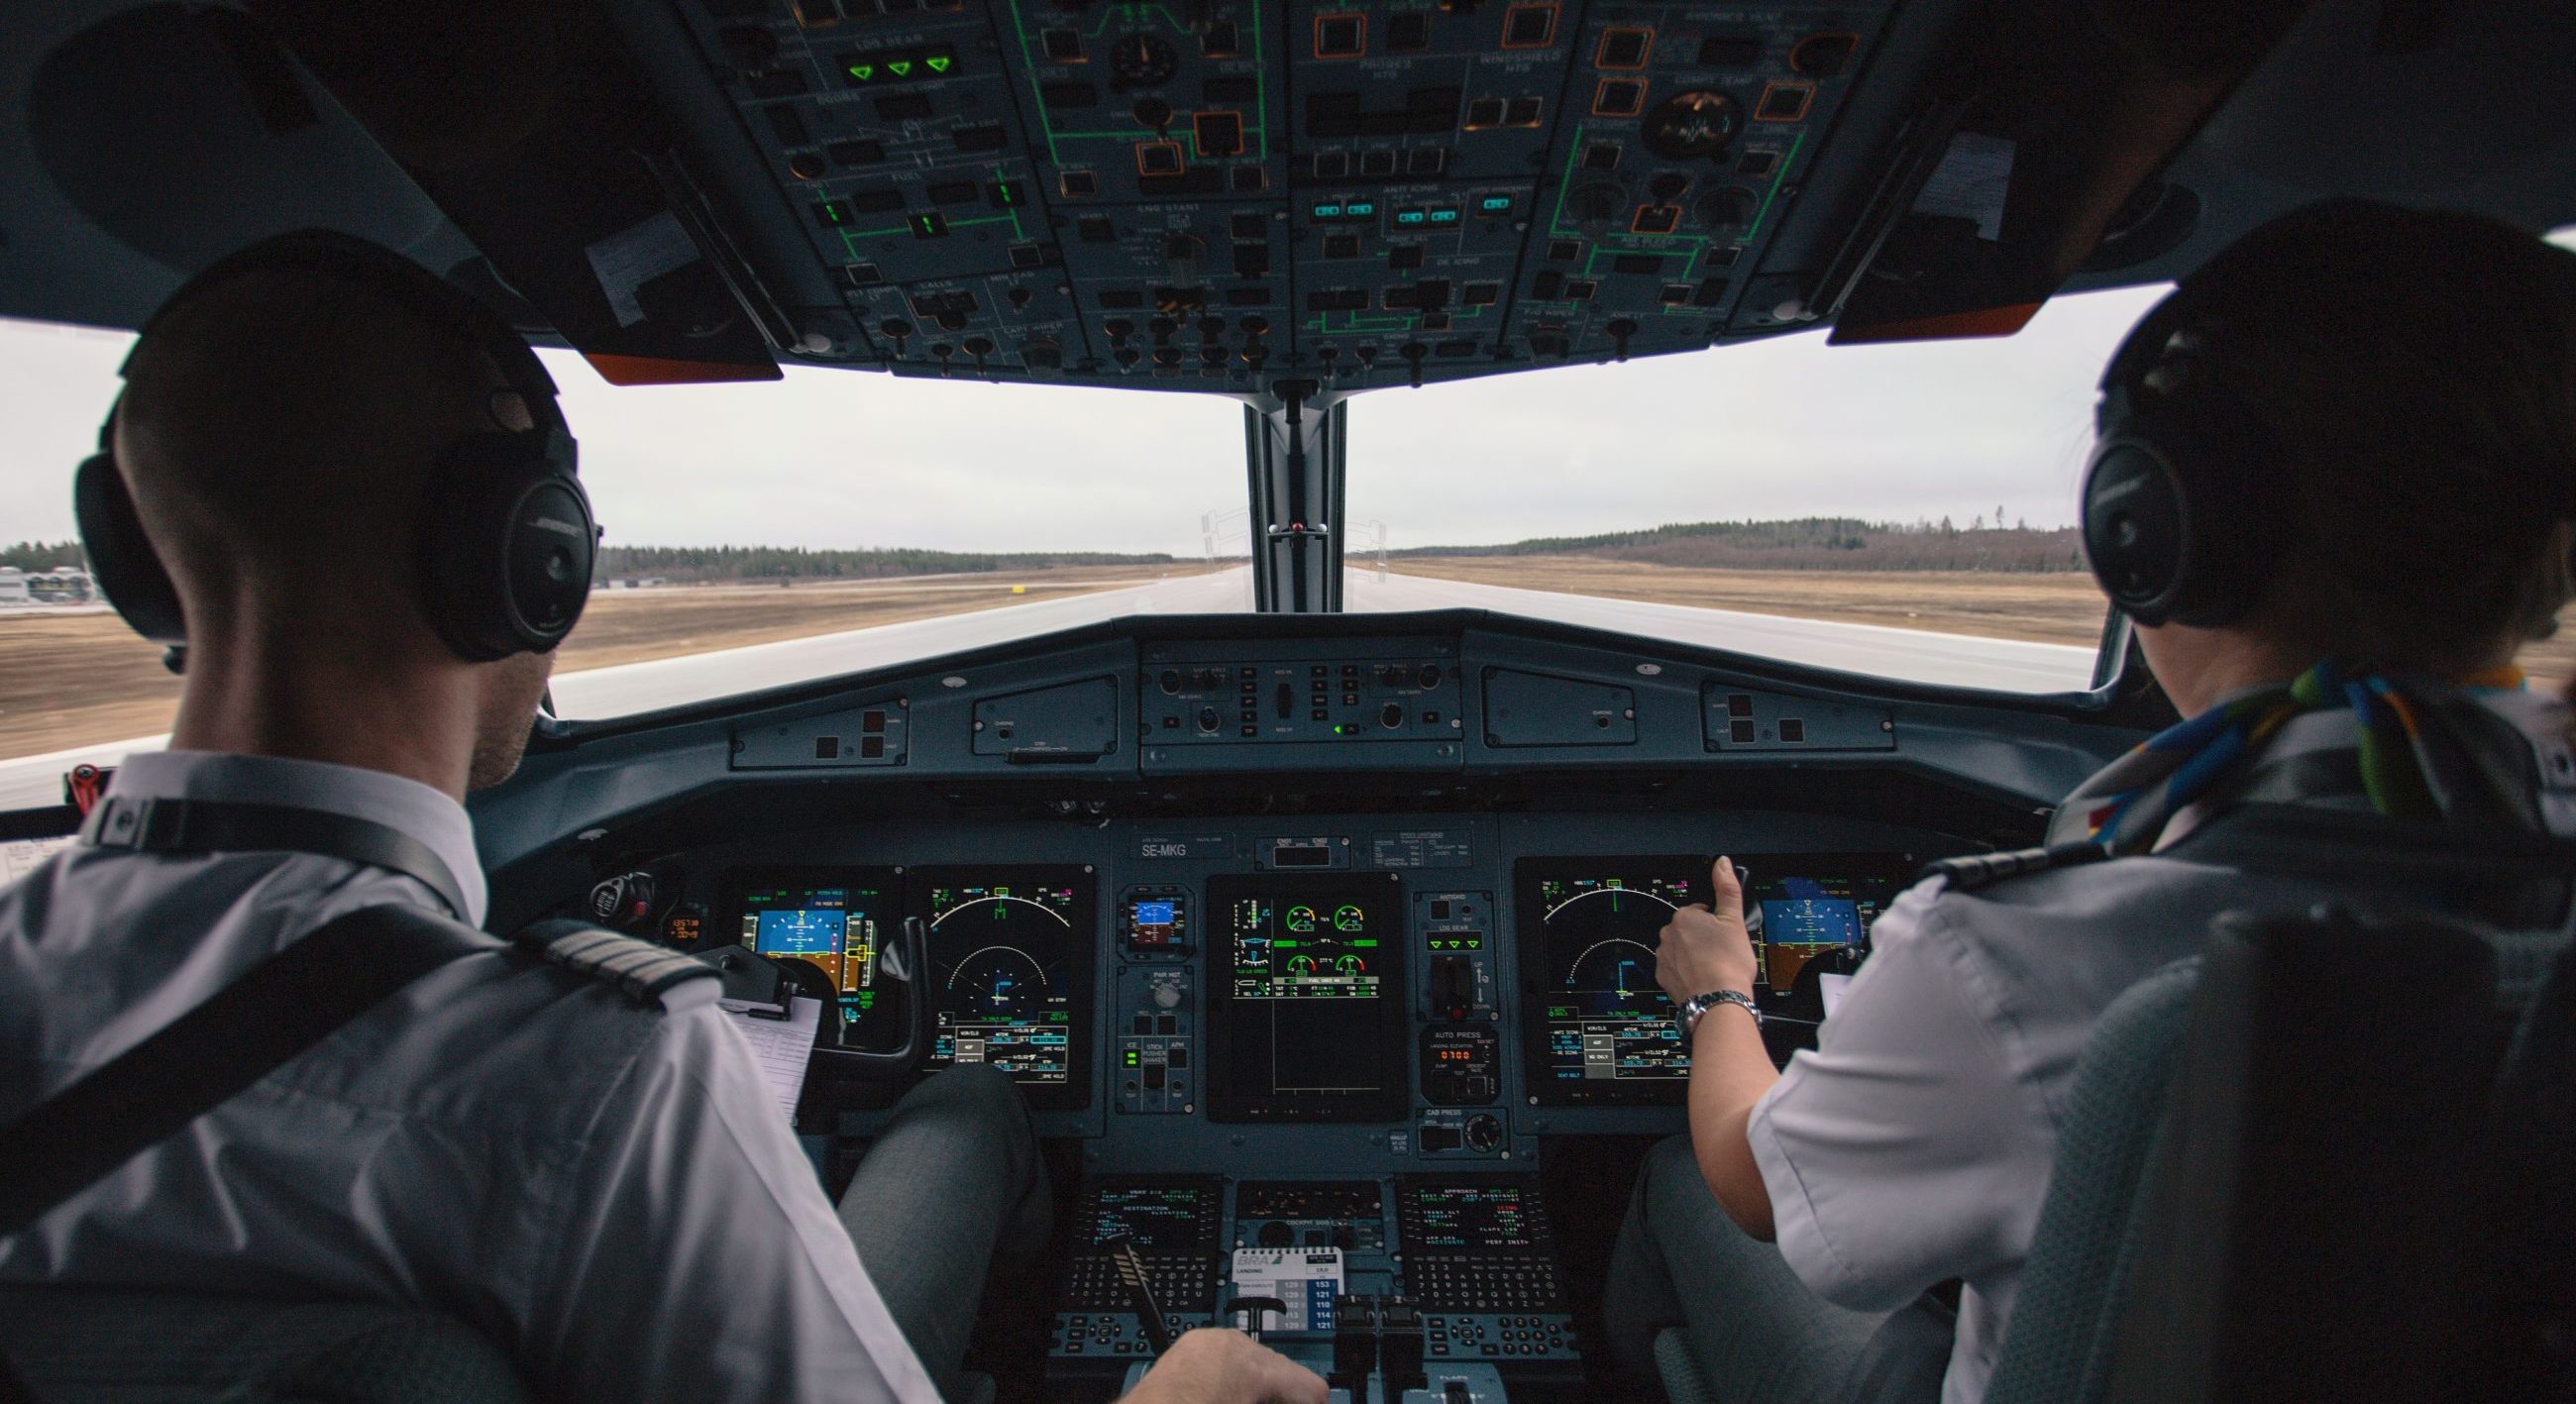 Surveys show that many consumers think pilots fly manually much more than they actually do.